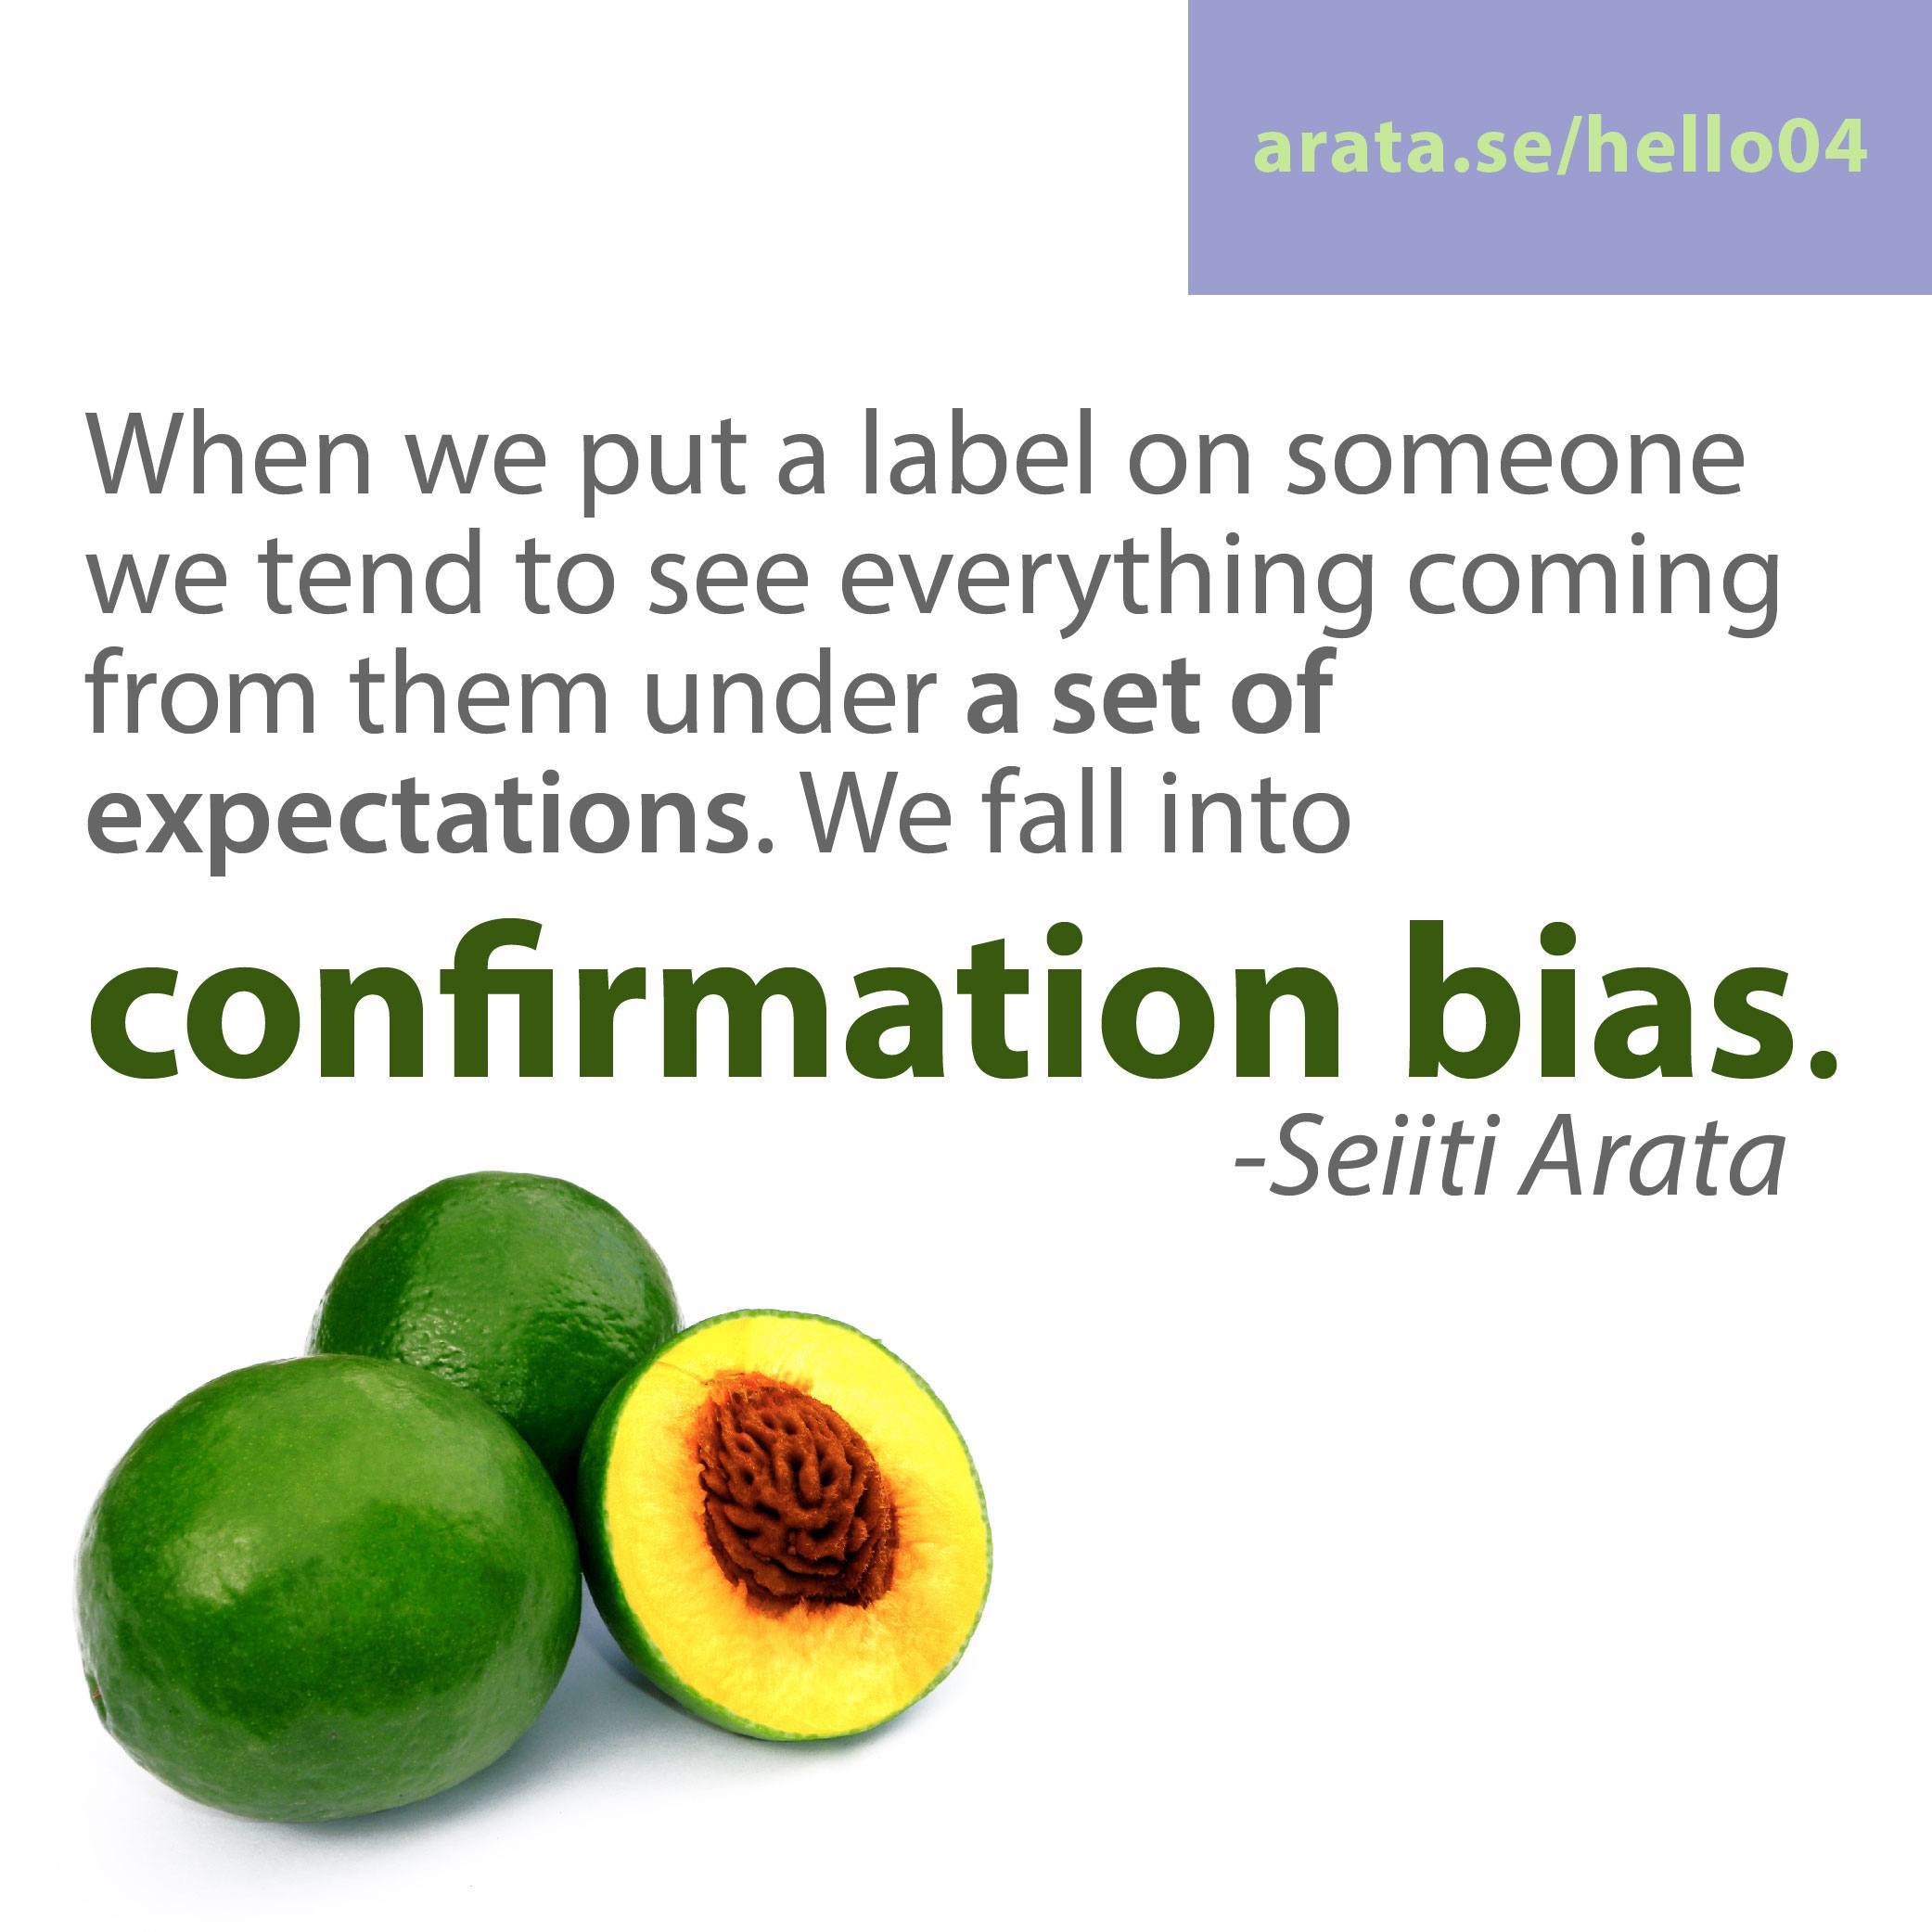 Please don’t label. When we put a label on someone we tend to see everything coming from them under a set of expectations. We fall into confirmation bias.